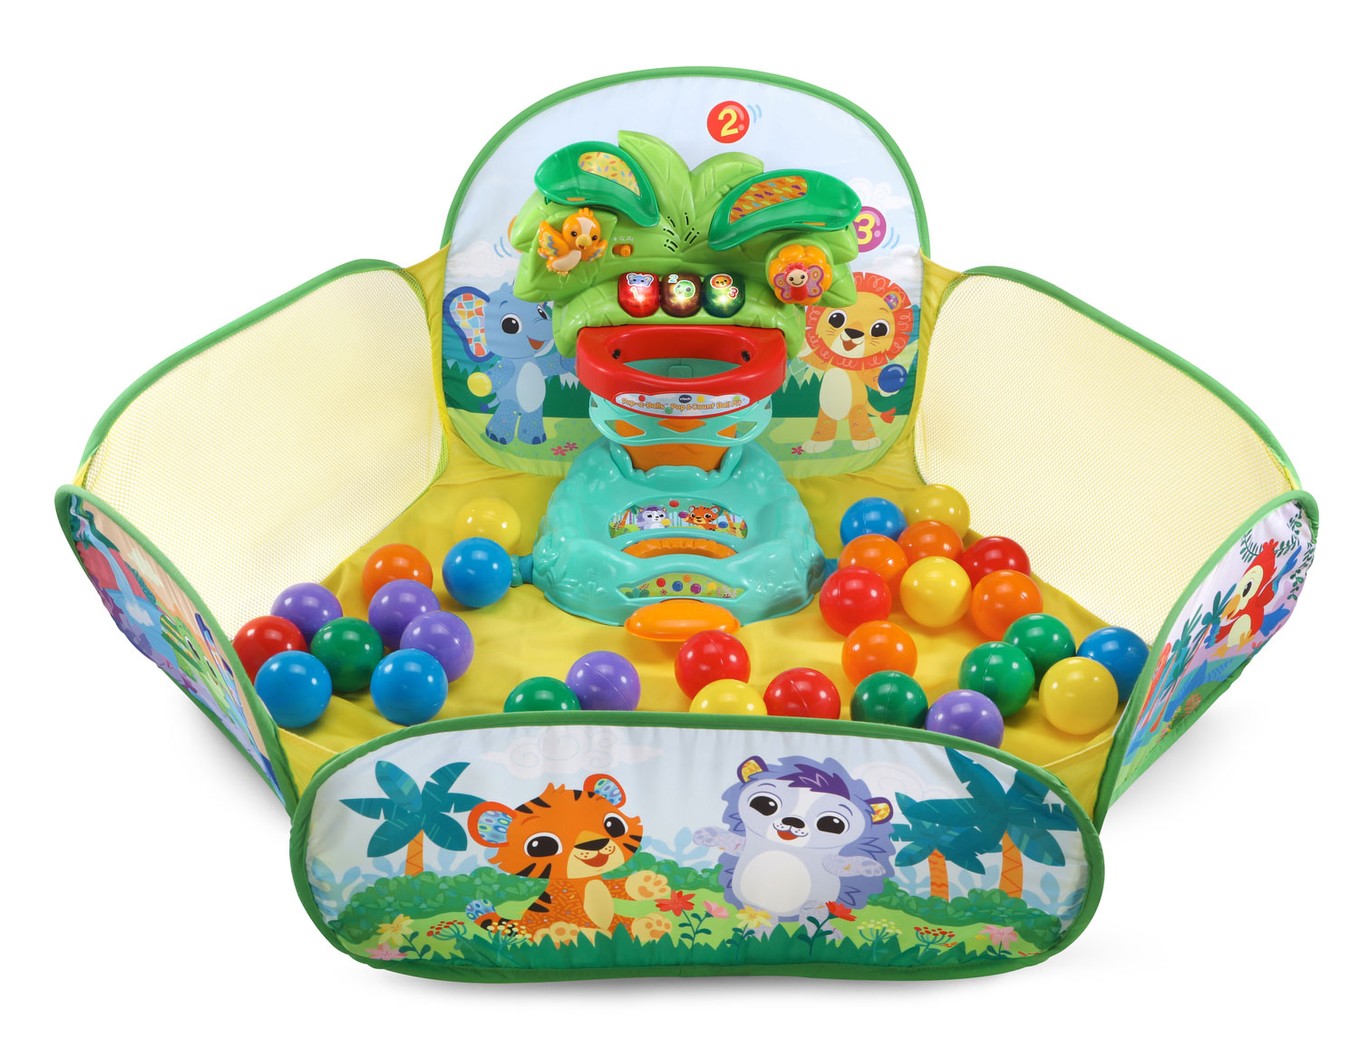 VTech® Pop-a-Balls™ Pop & Count Ball Pit™ Learning Toy With 30 Balls